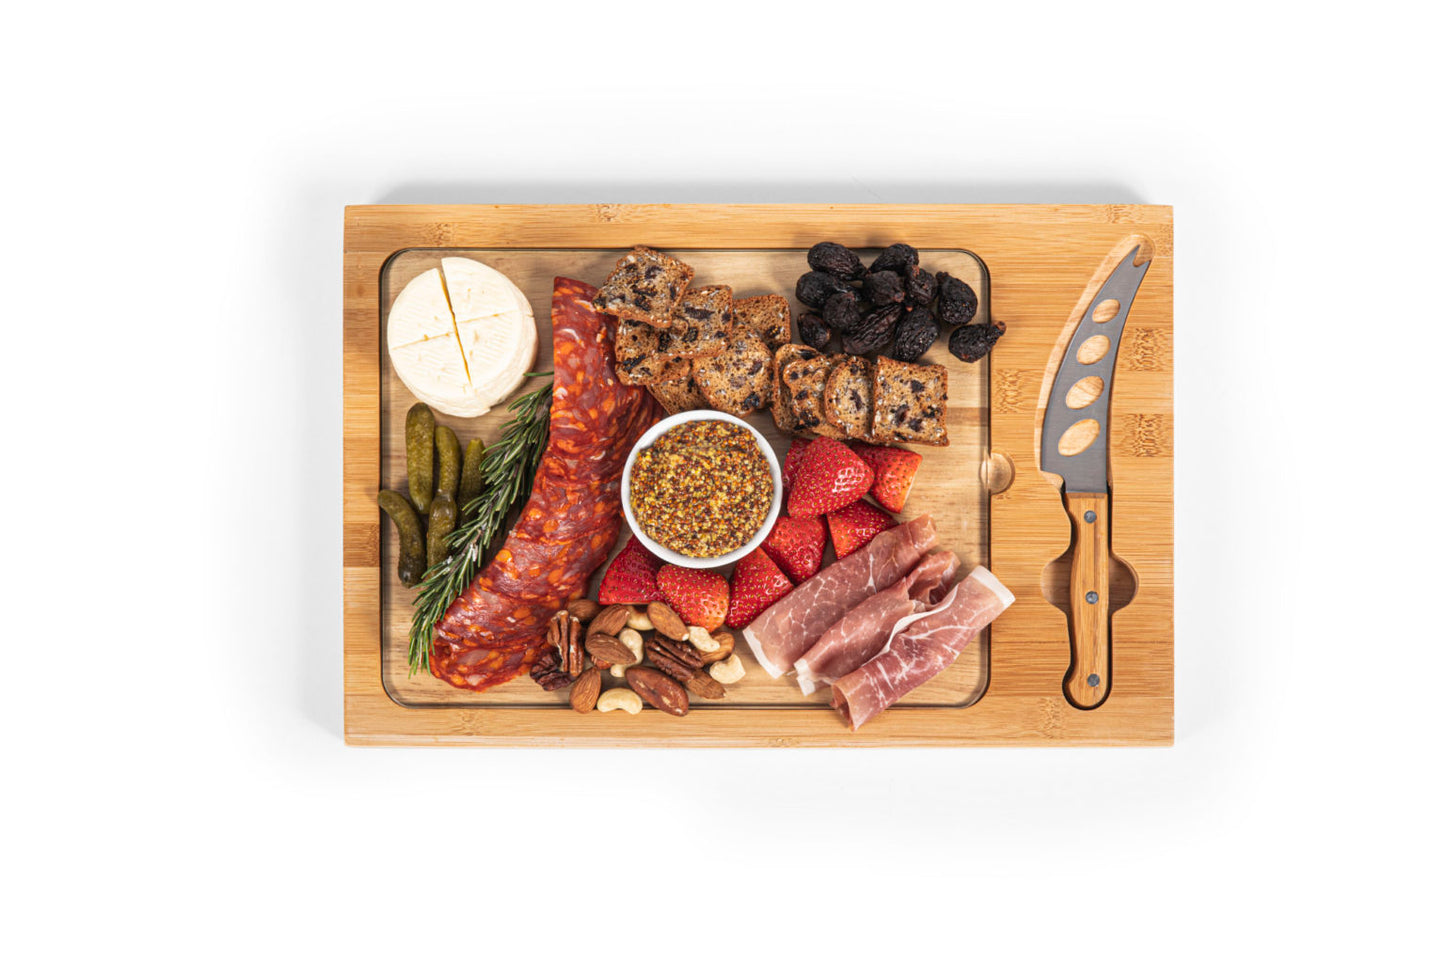 Los Angeles Chargers - Icon Glass Top Cutting Board & Knife Set by Picnic Time